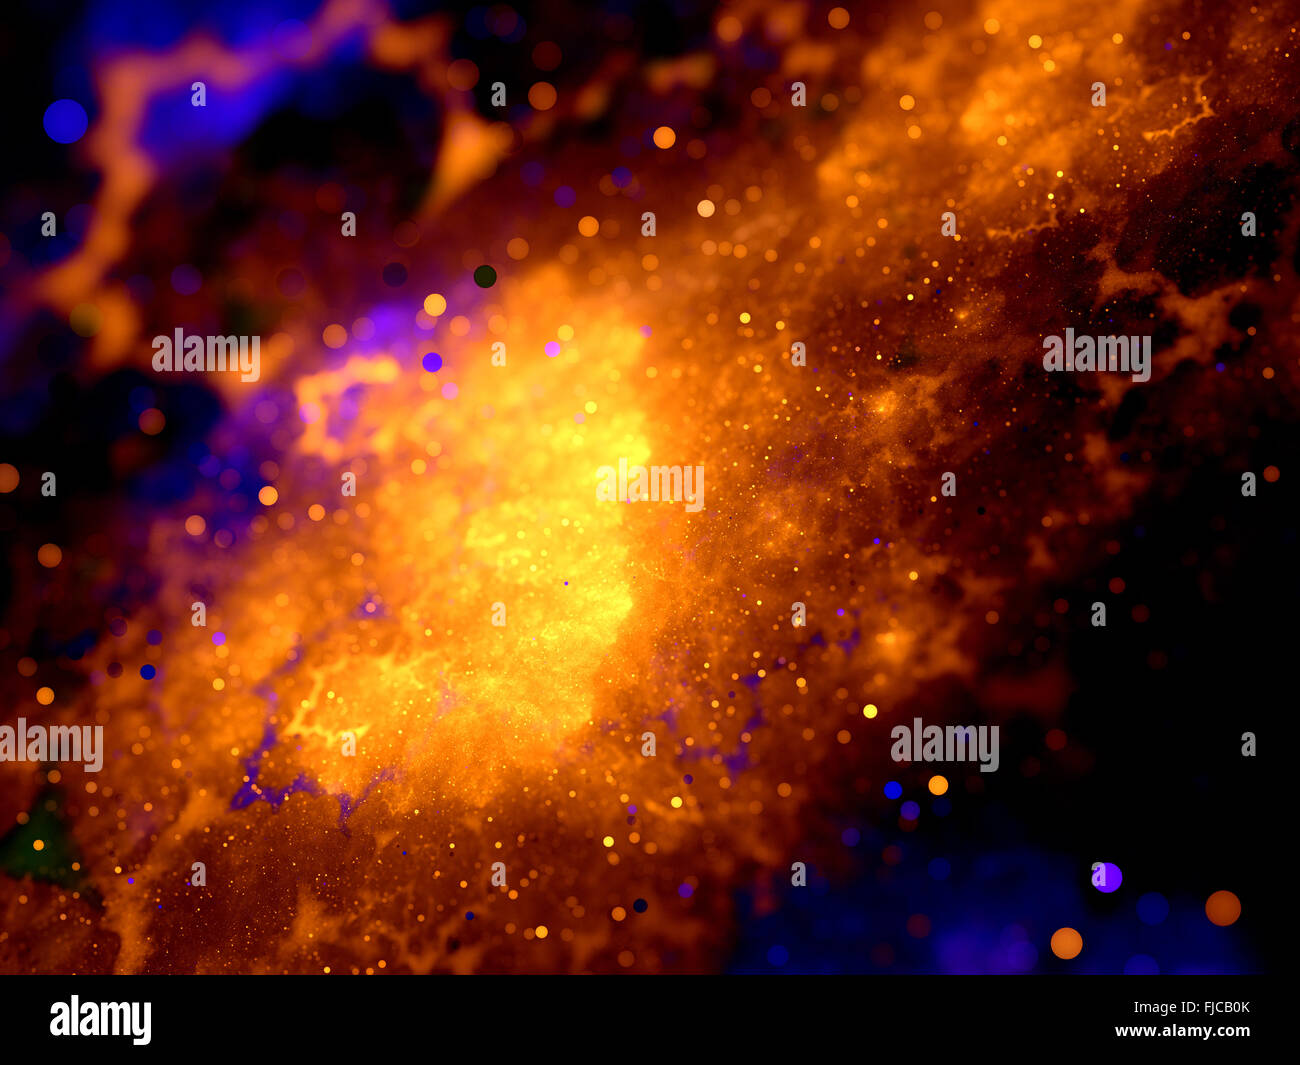 Multicolored starfield in deep space, computer generated abstract background Stock Photo